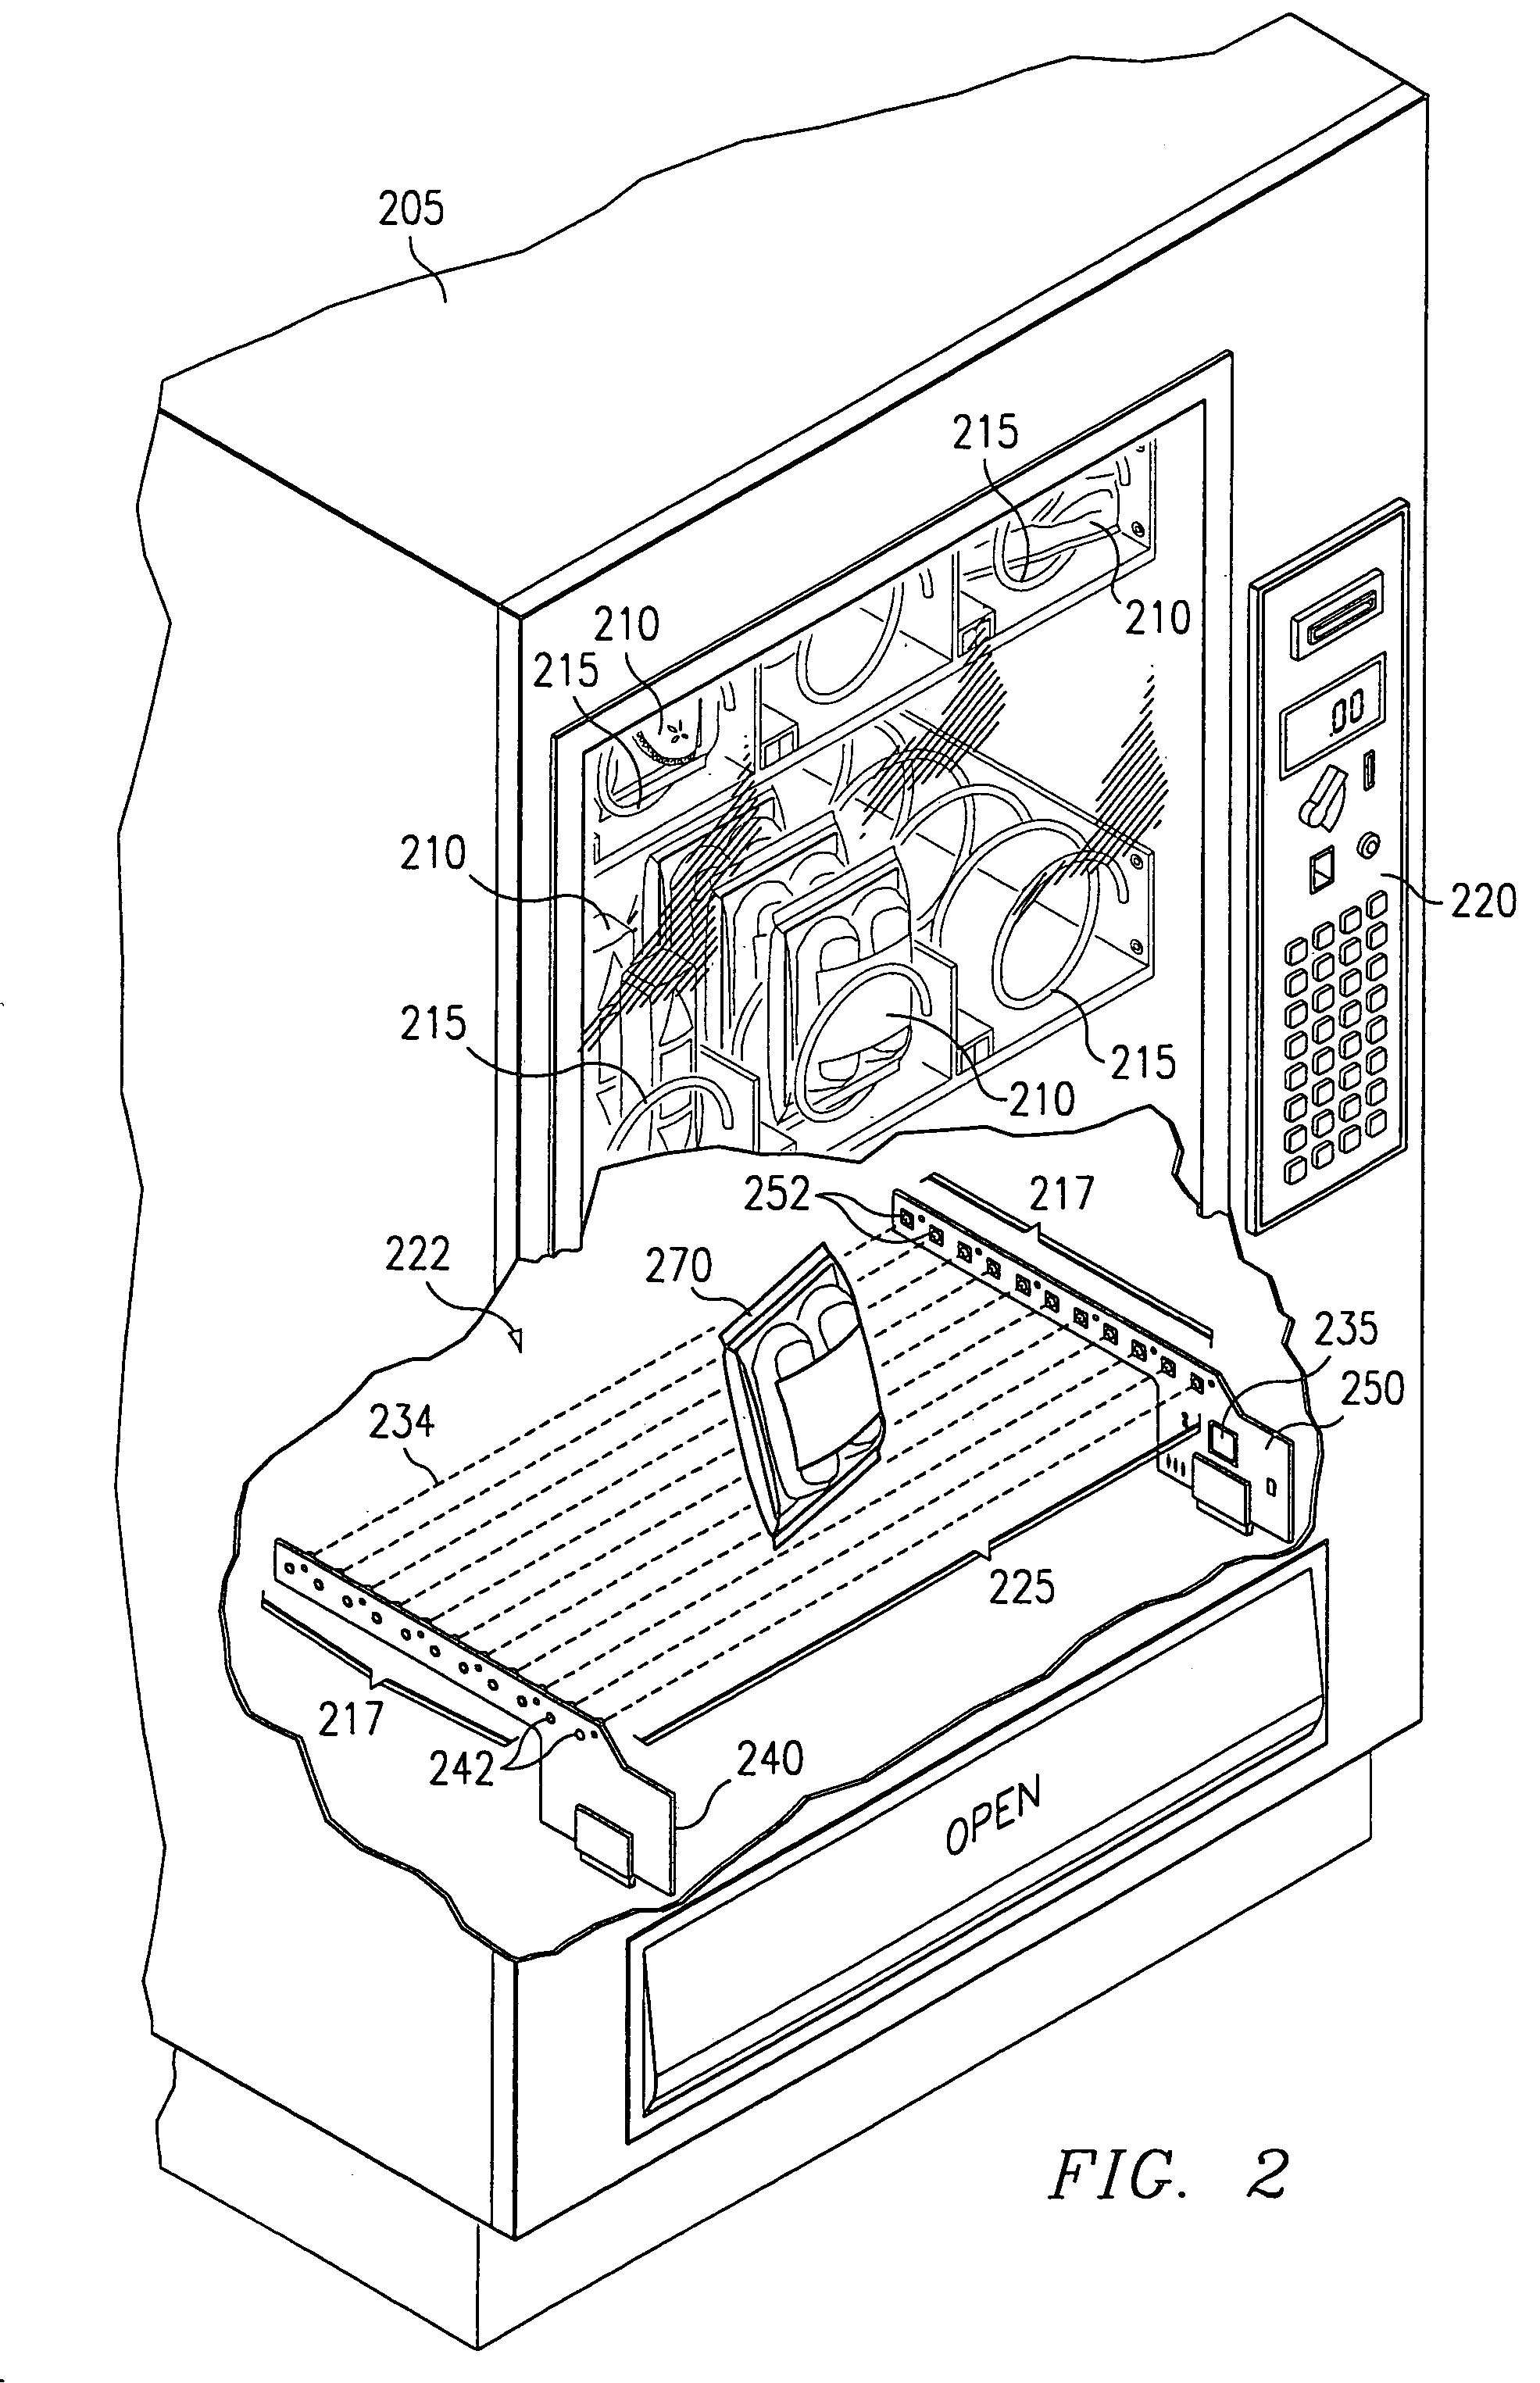 Method and system for accomplishing product detection